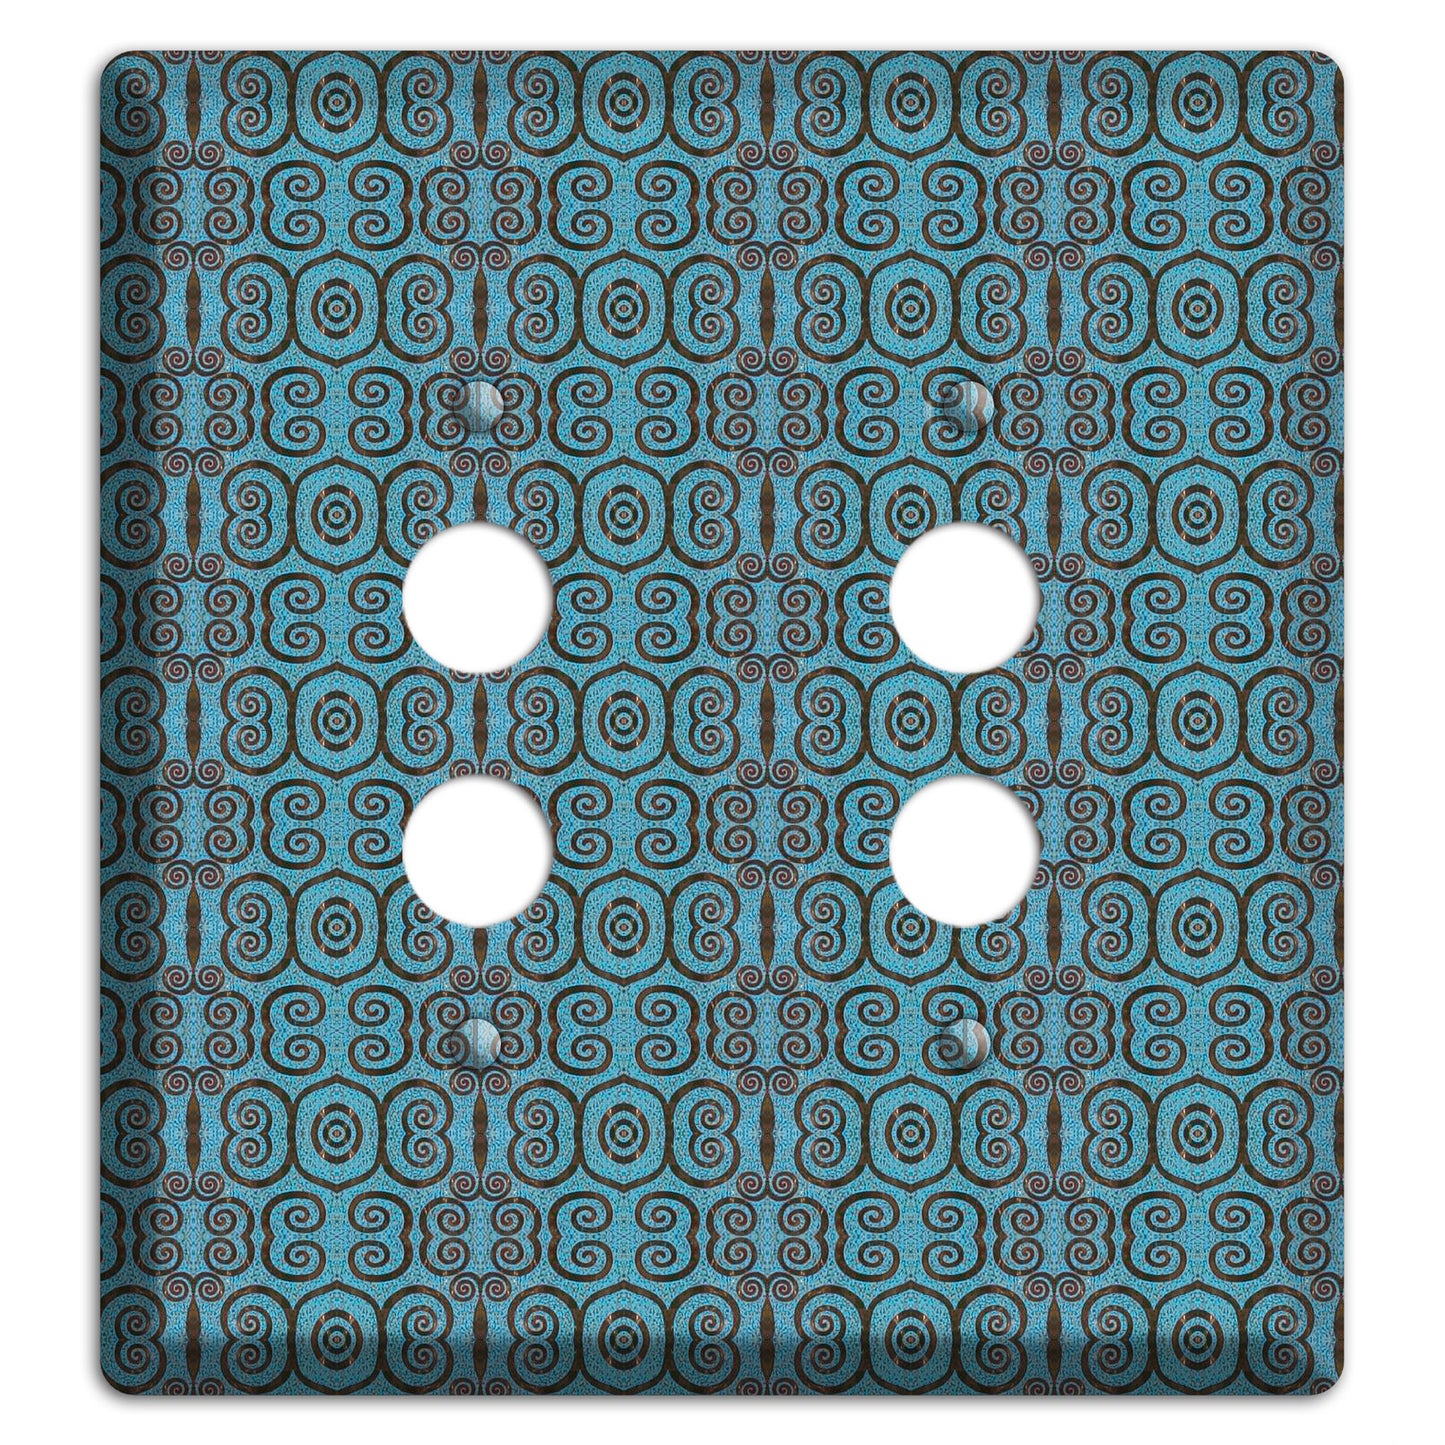 Blue Tapestry 2 Pushbutton Wallplate